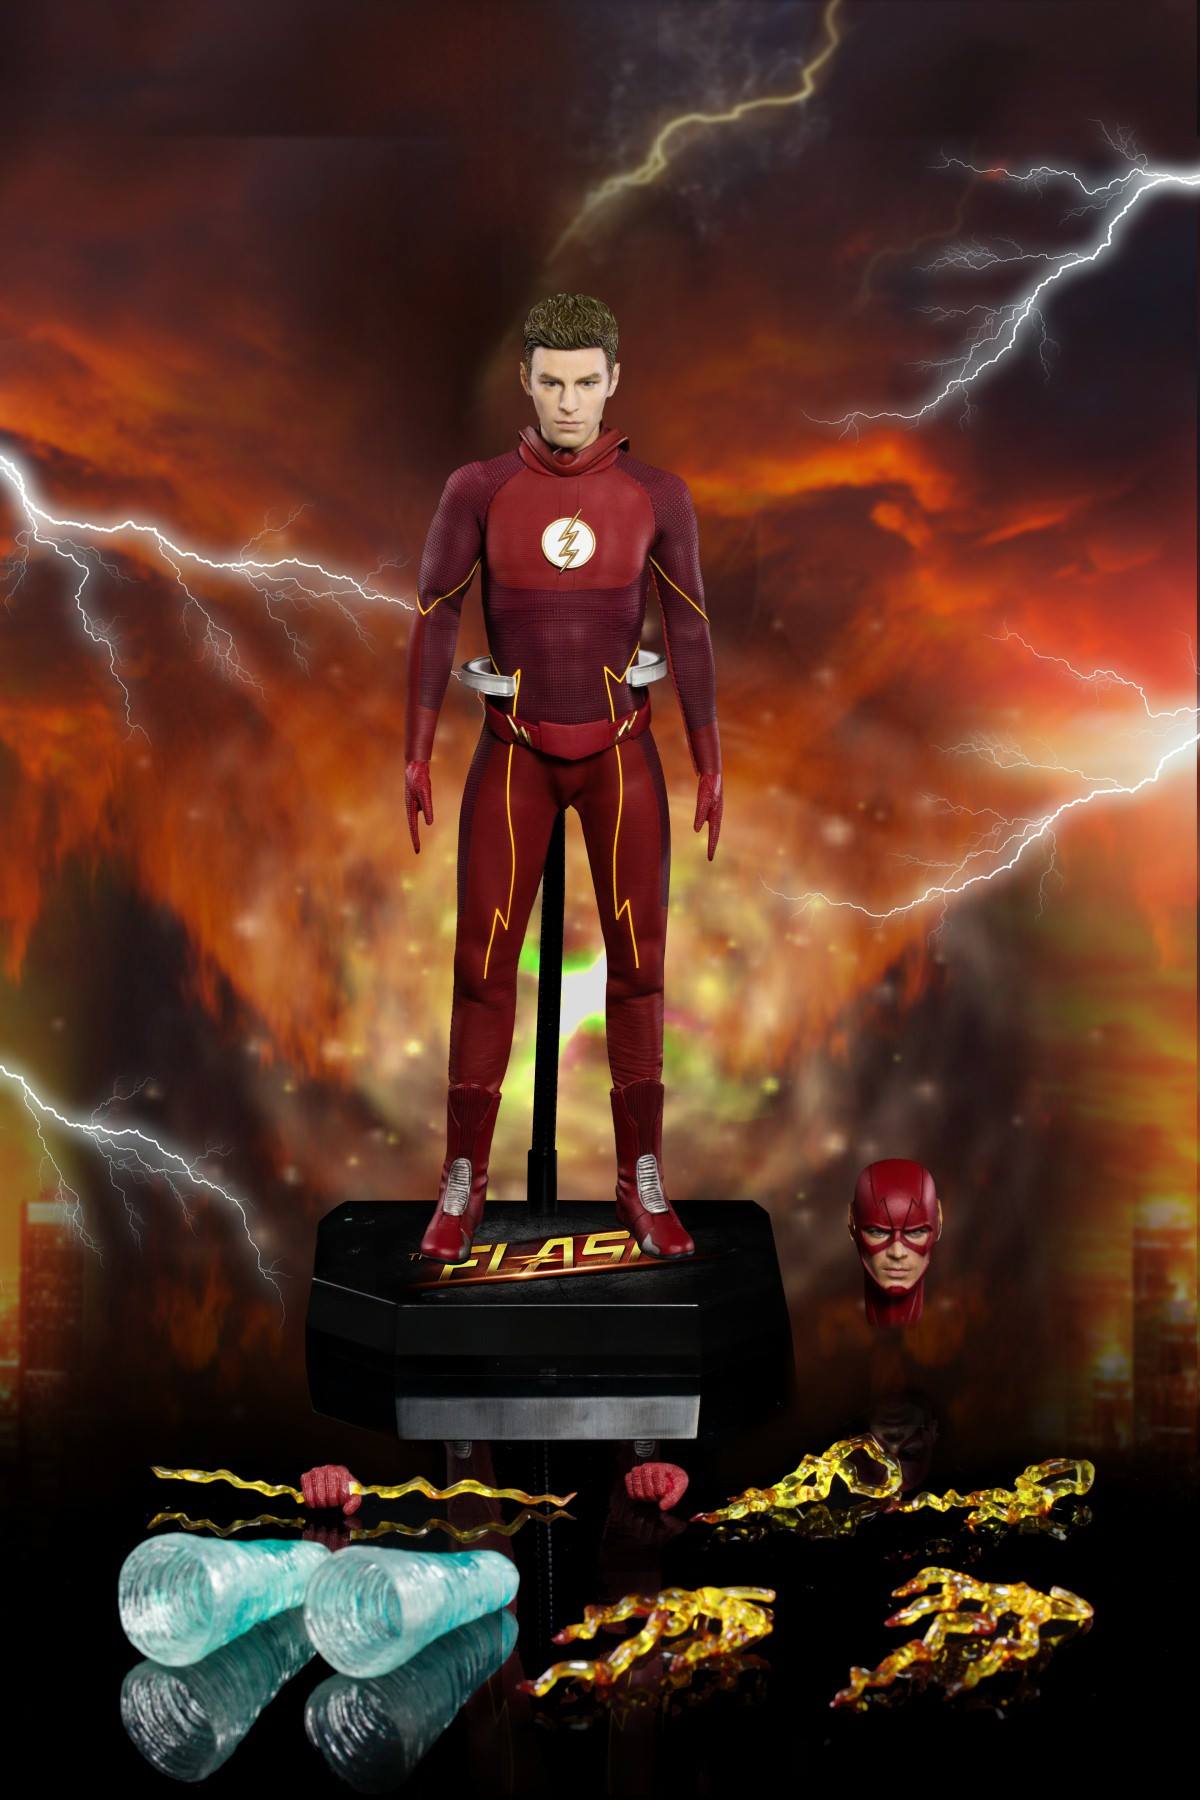 Star Ace Toys - The Flash TV Series - The Flash/Barry Allen (1/8 Scale) - Marvelous Toys